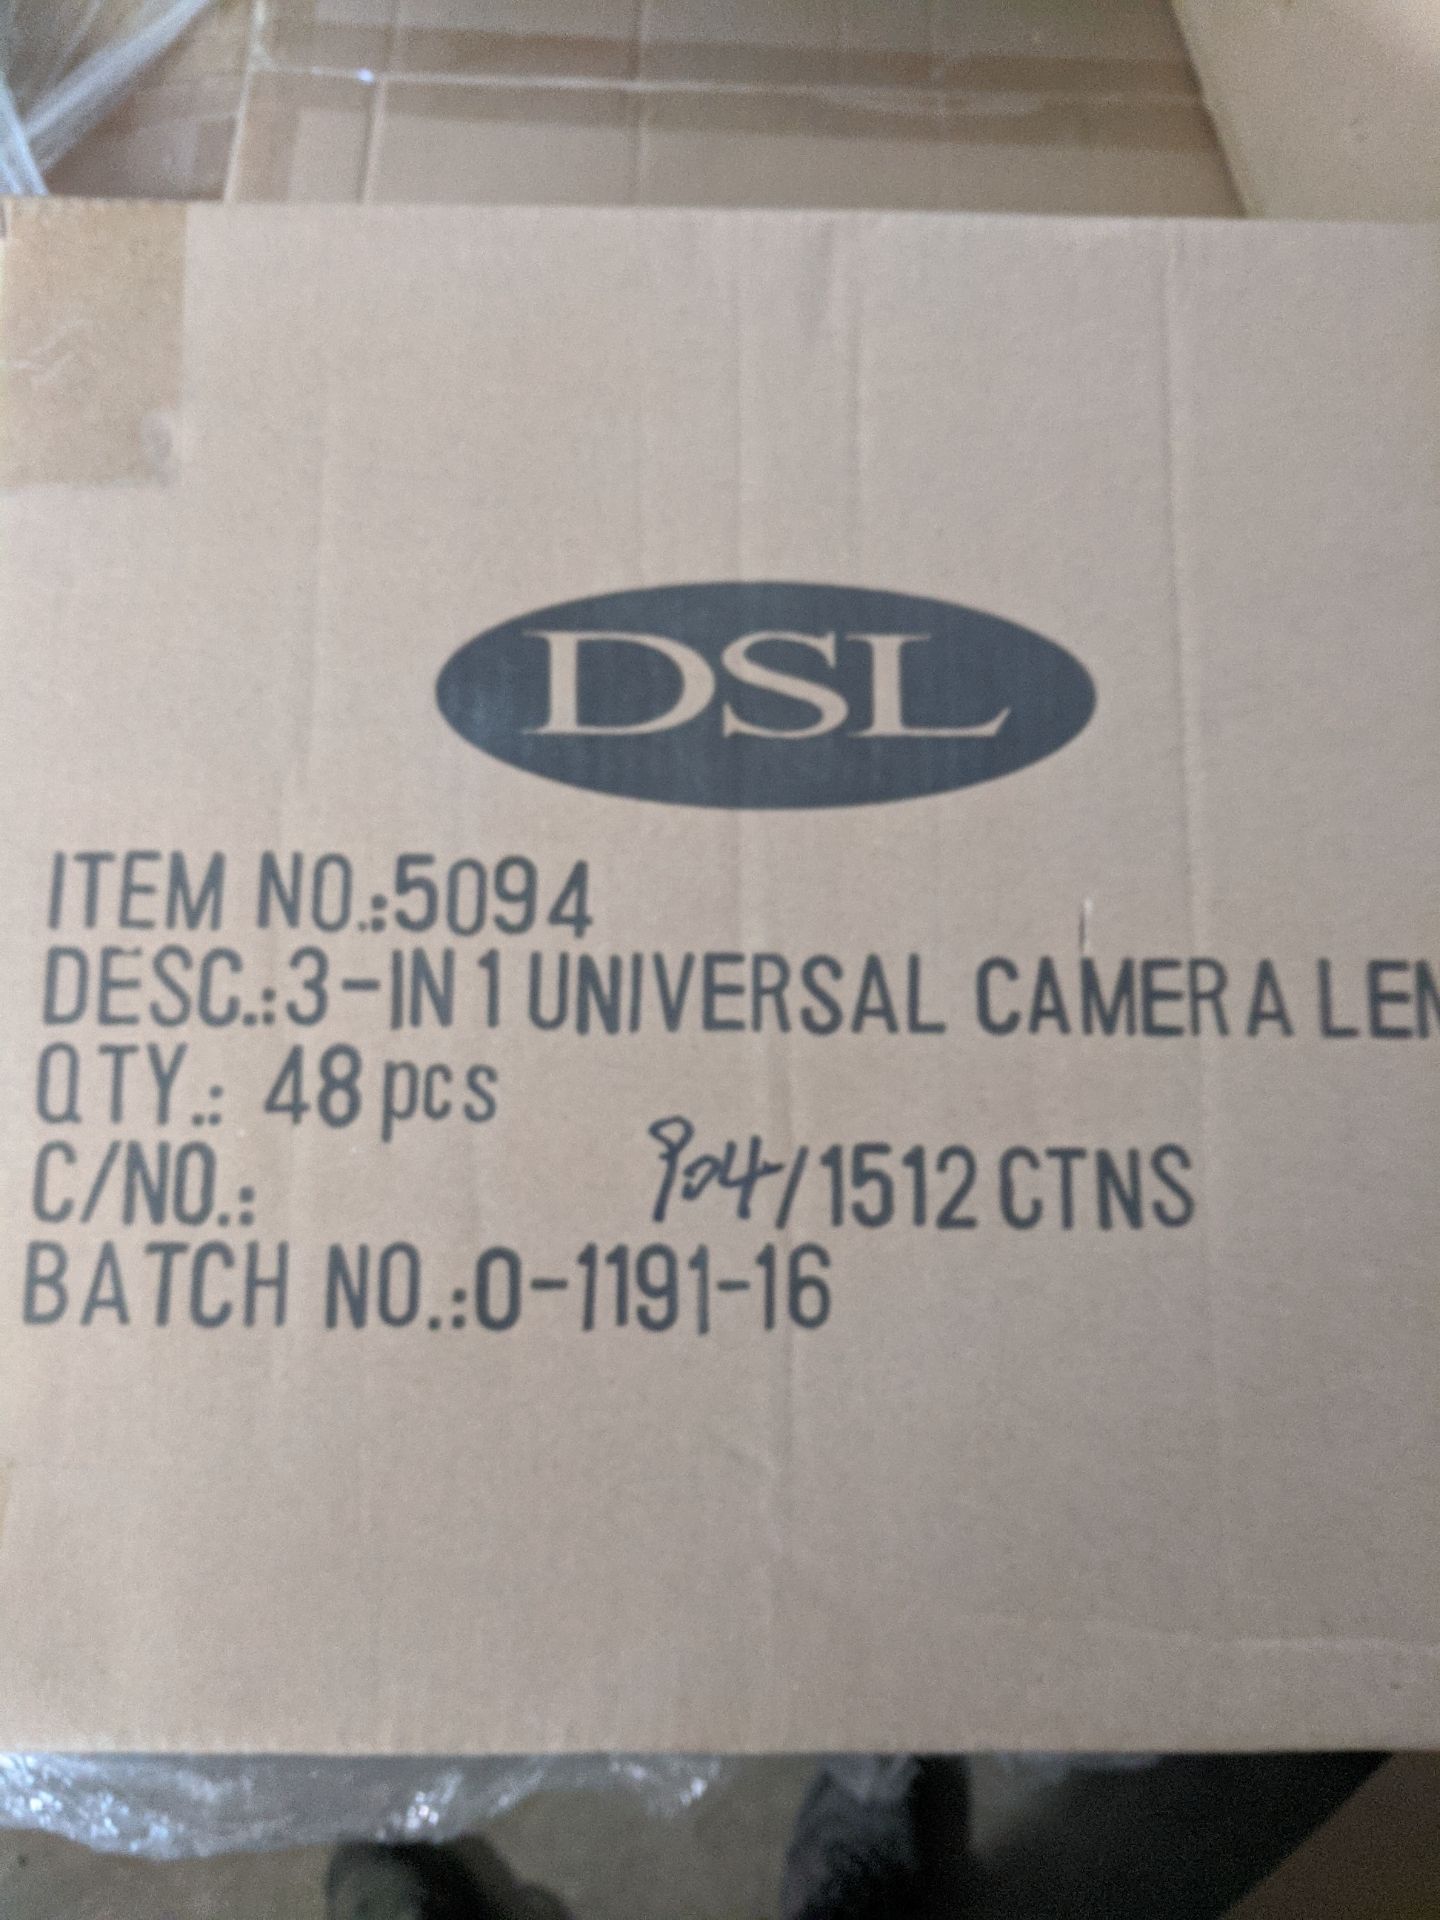 250 BRAND NEW AND SEALED 3 IN 1 UNIVERSAL CAMERA LENS, MAKES PICTURES PANORAMIC, PLUS OTHER FEATURES - Image 3 of 3